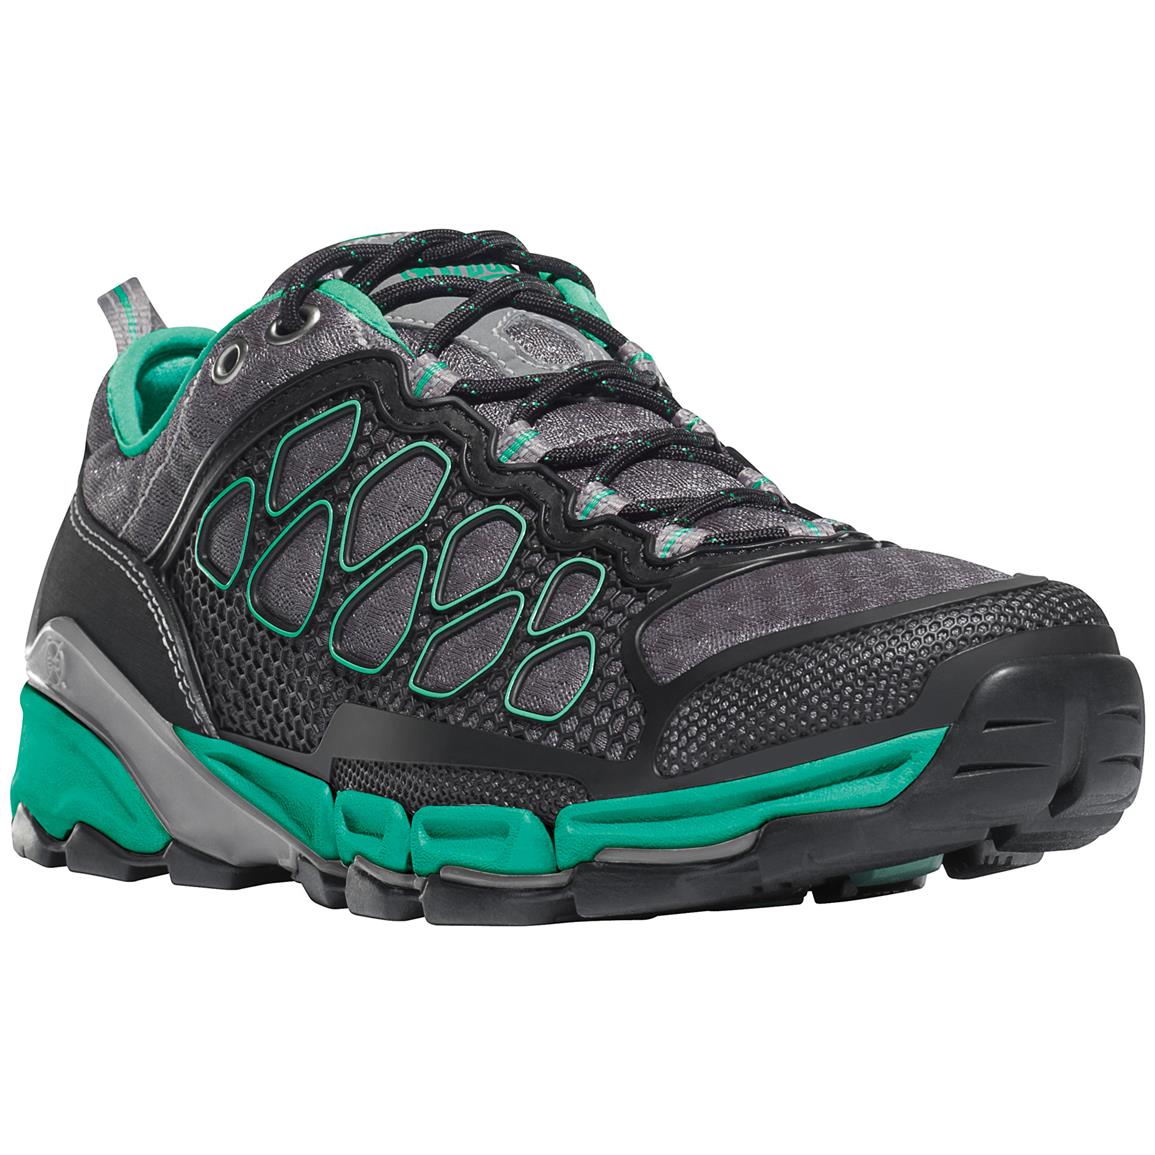 Women's Danner Extrovert Hiking Shoes - 614629, Hiking Boots & Shoes at